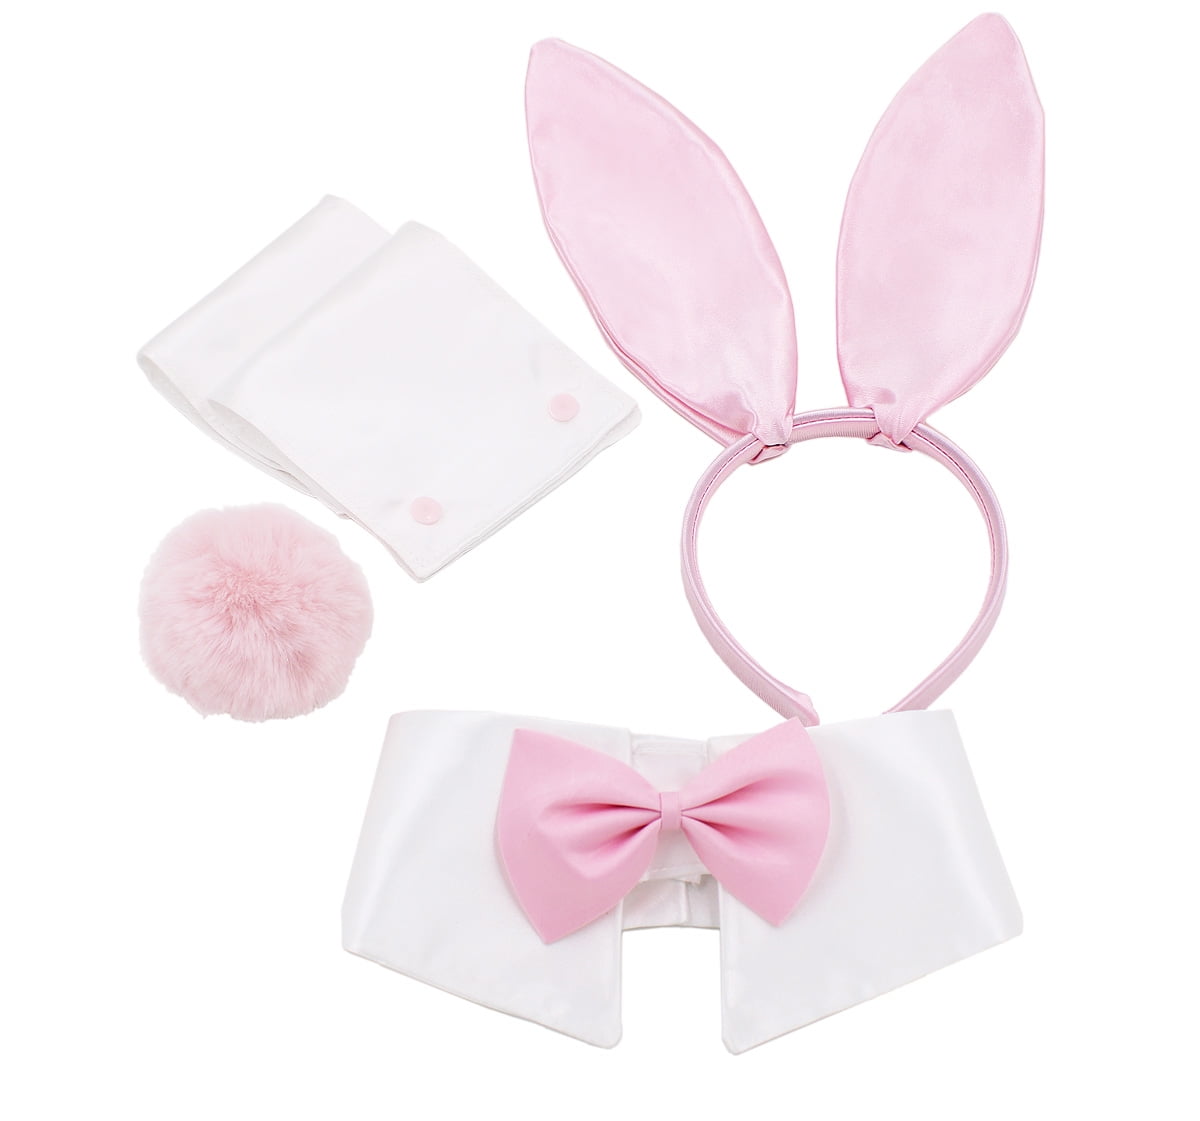 Geyoga Easter Bunny Ears Hat Bow Tie Tail Cosplay Accessories Kit for Kids Adult 